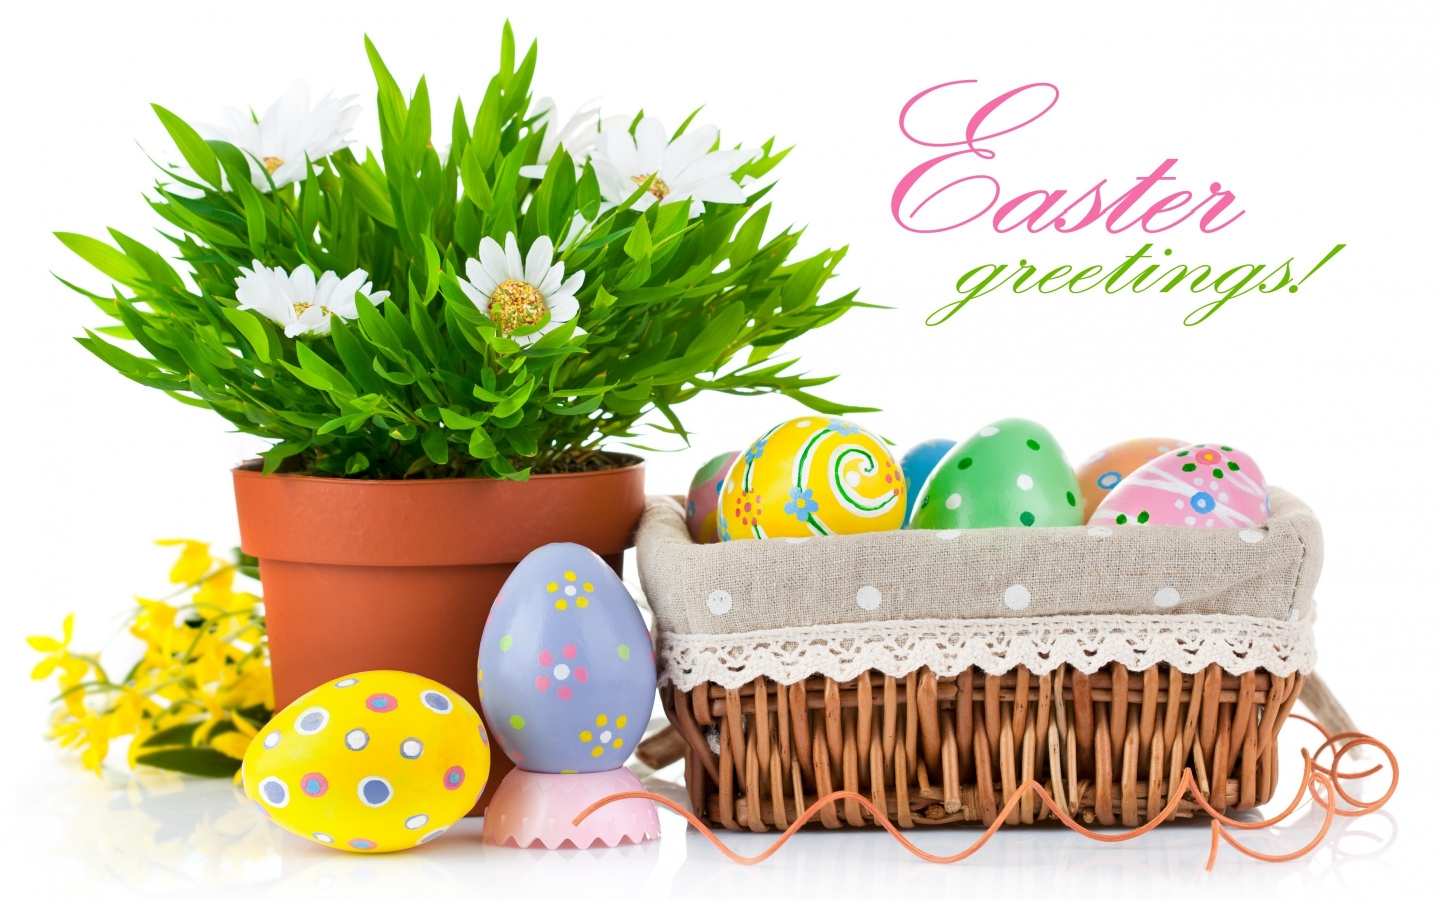 Easter Greetings for 1440 x 900 widescreen resolution